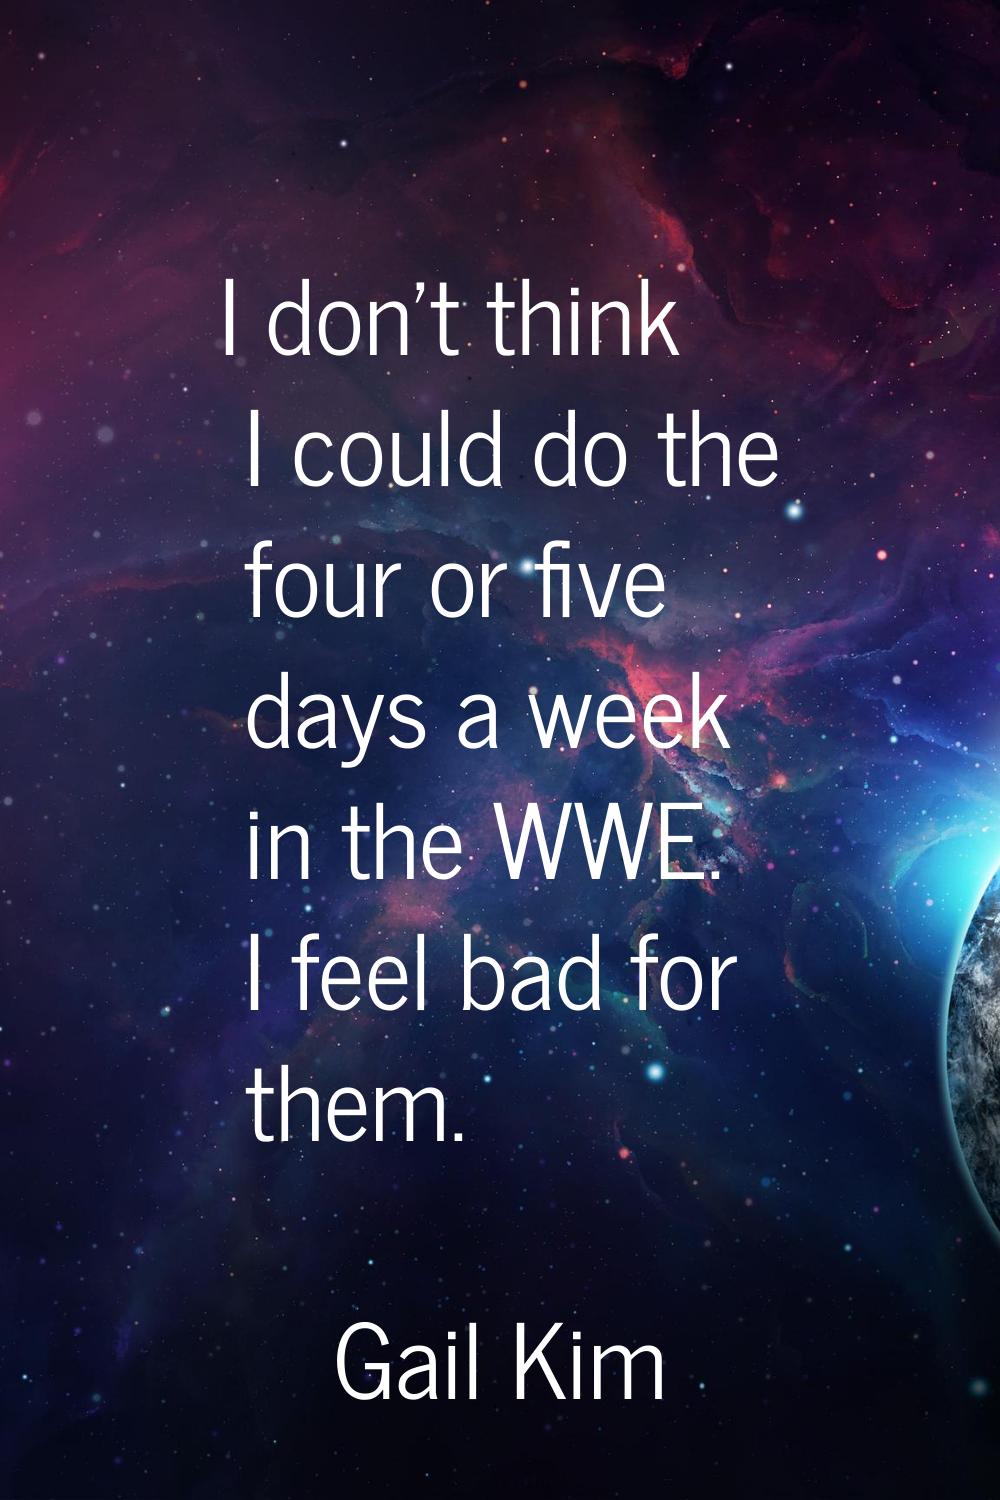 I don't think I could do the four or five days a week in the WWE. I feel bad for them.